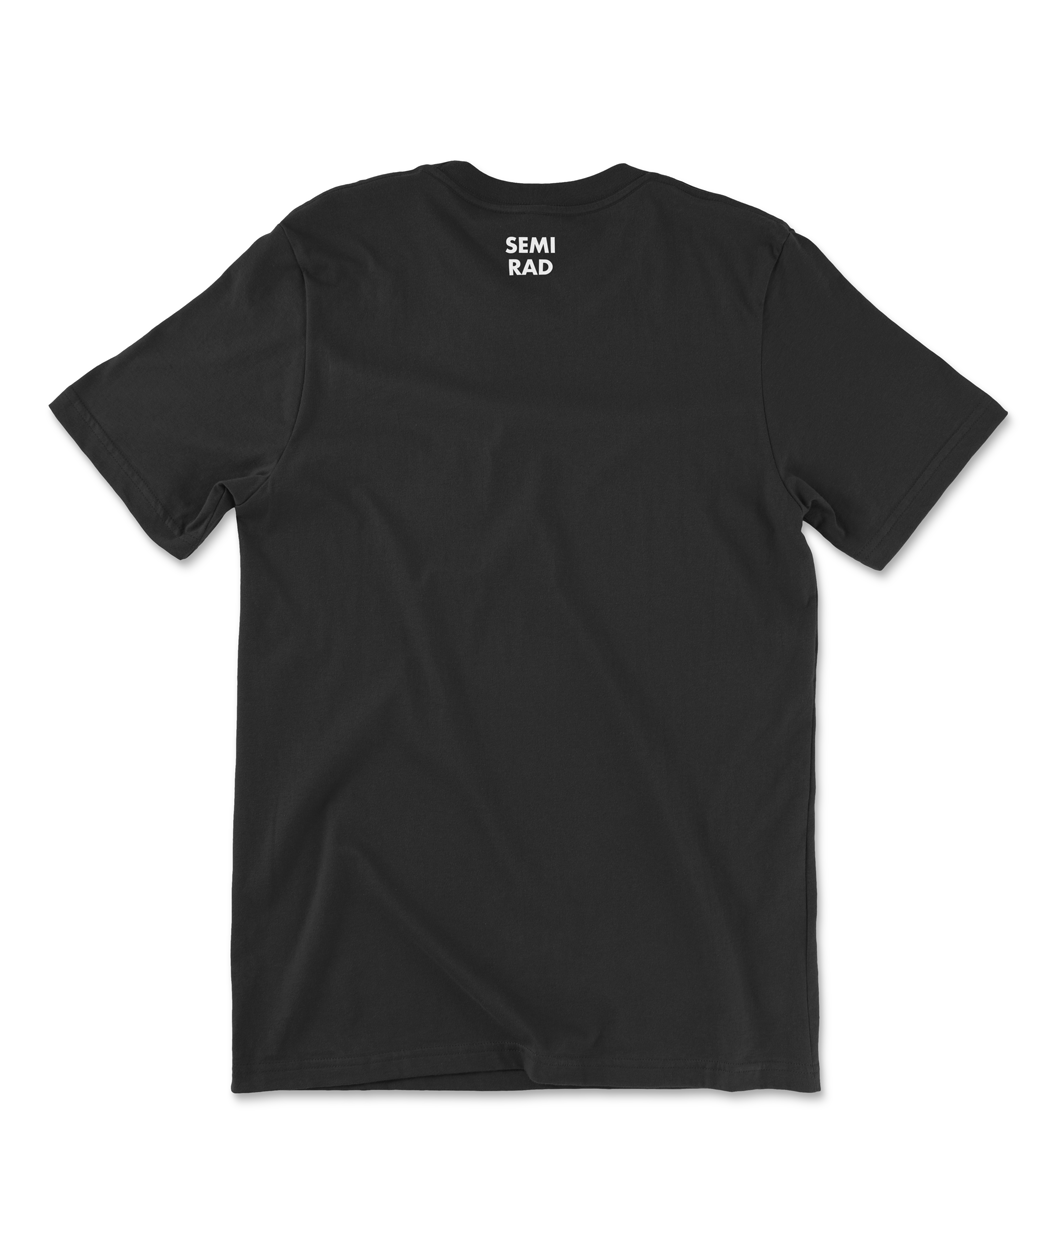 The back of a black t-shirt that says "Semi Rad" in small text at the collar.